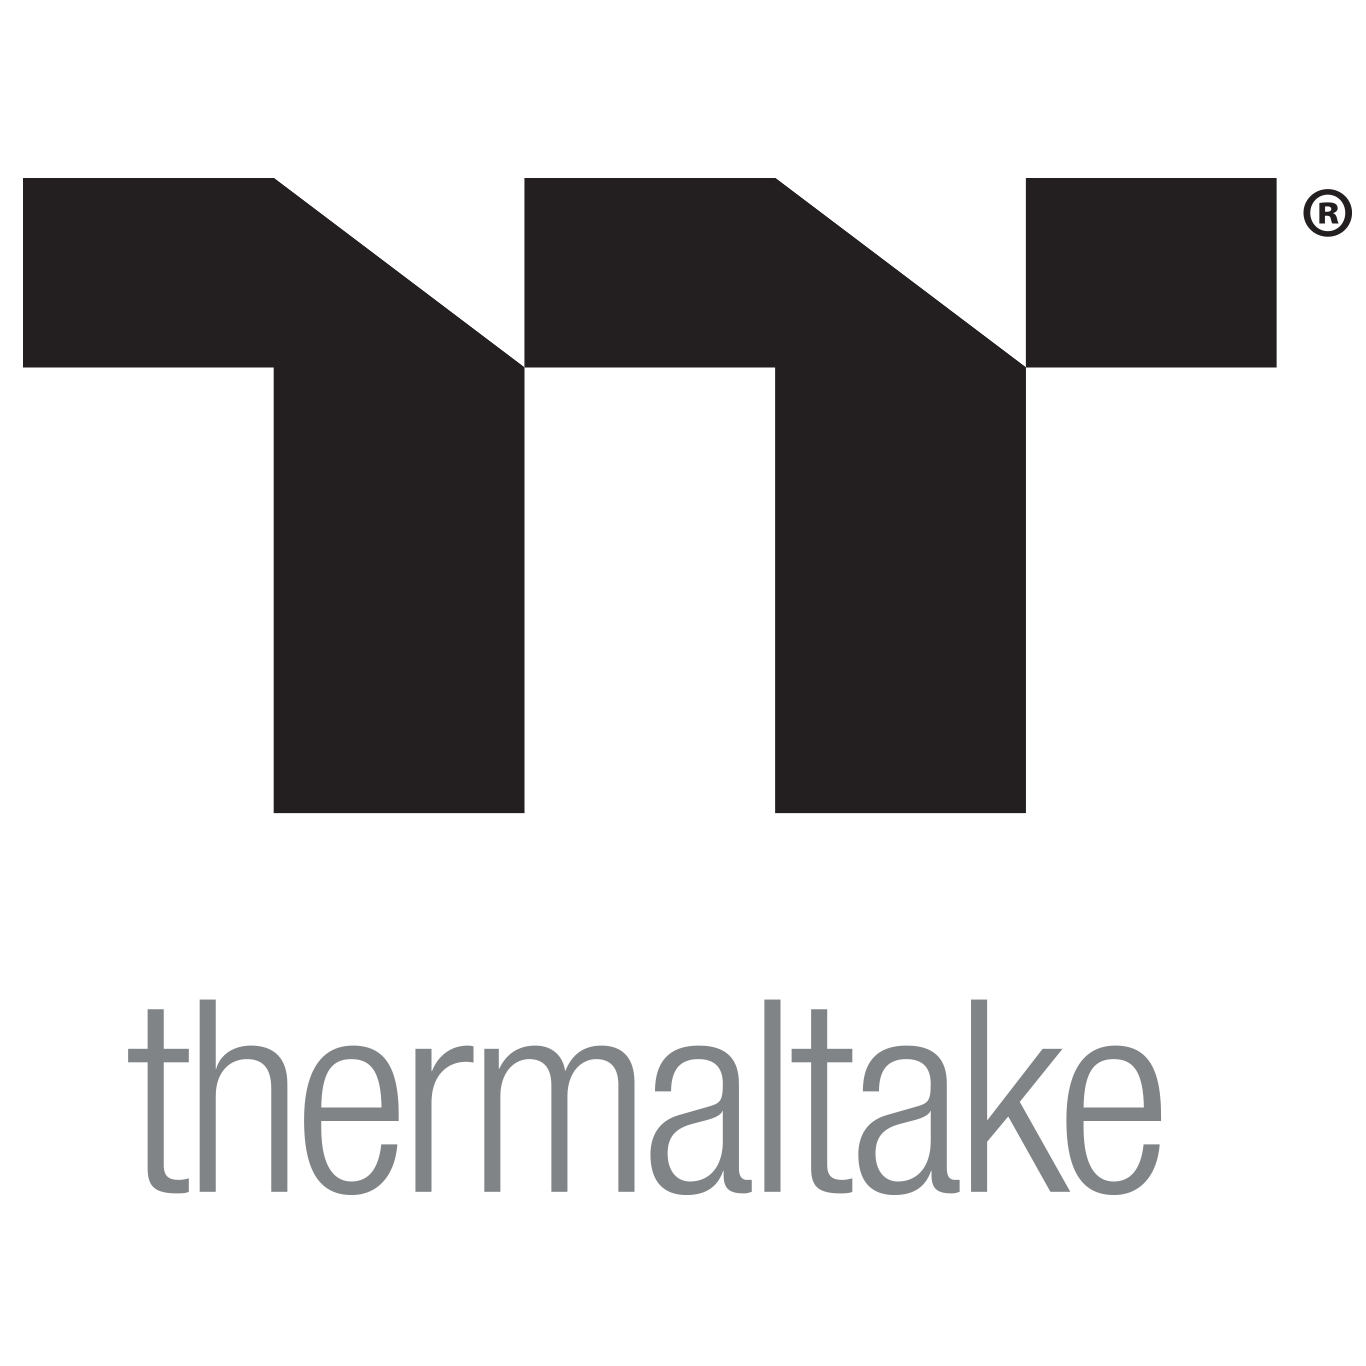 Thermaltake Official Store